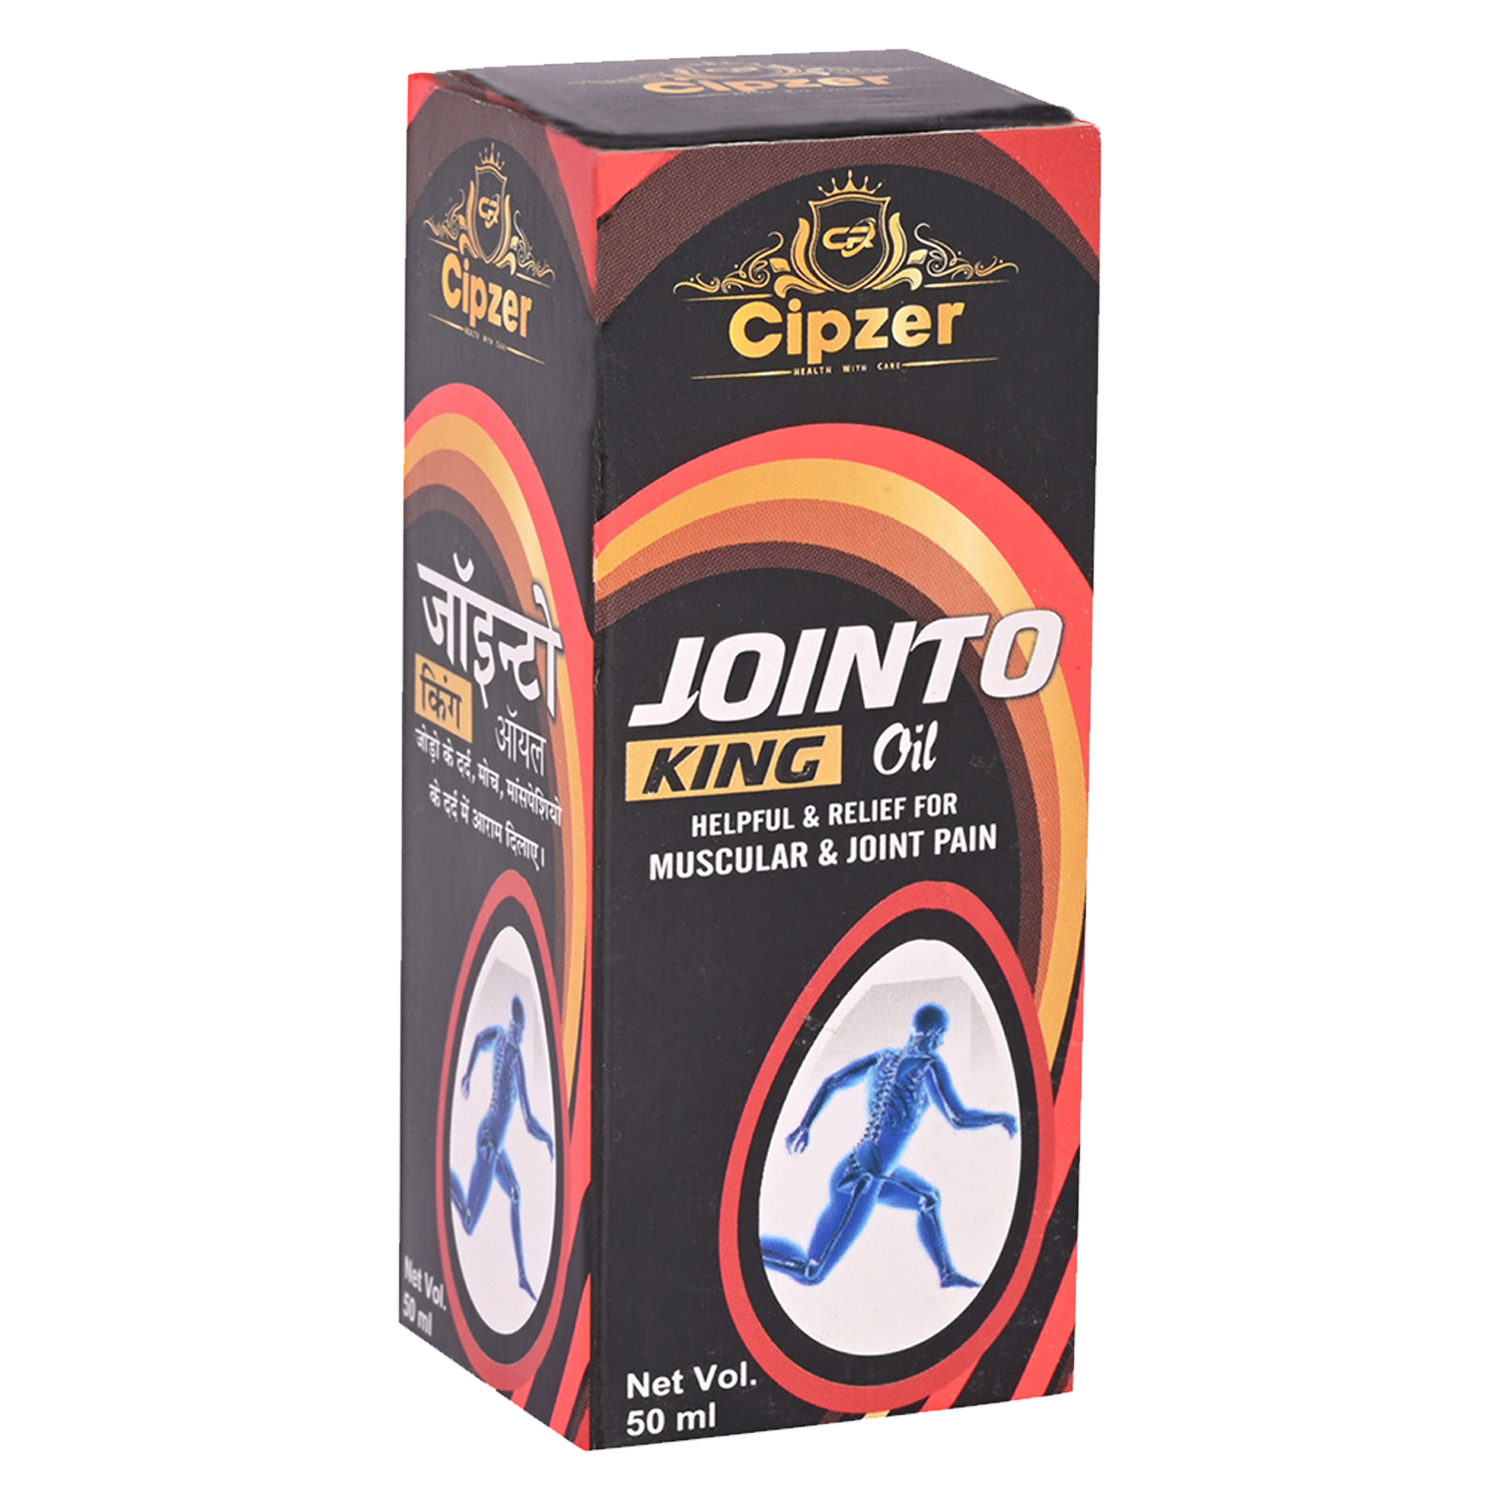 Buy Cipzer Jointo King Oil at Best Price Online